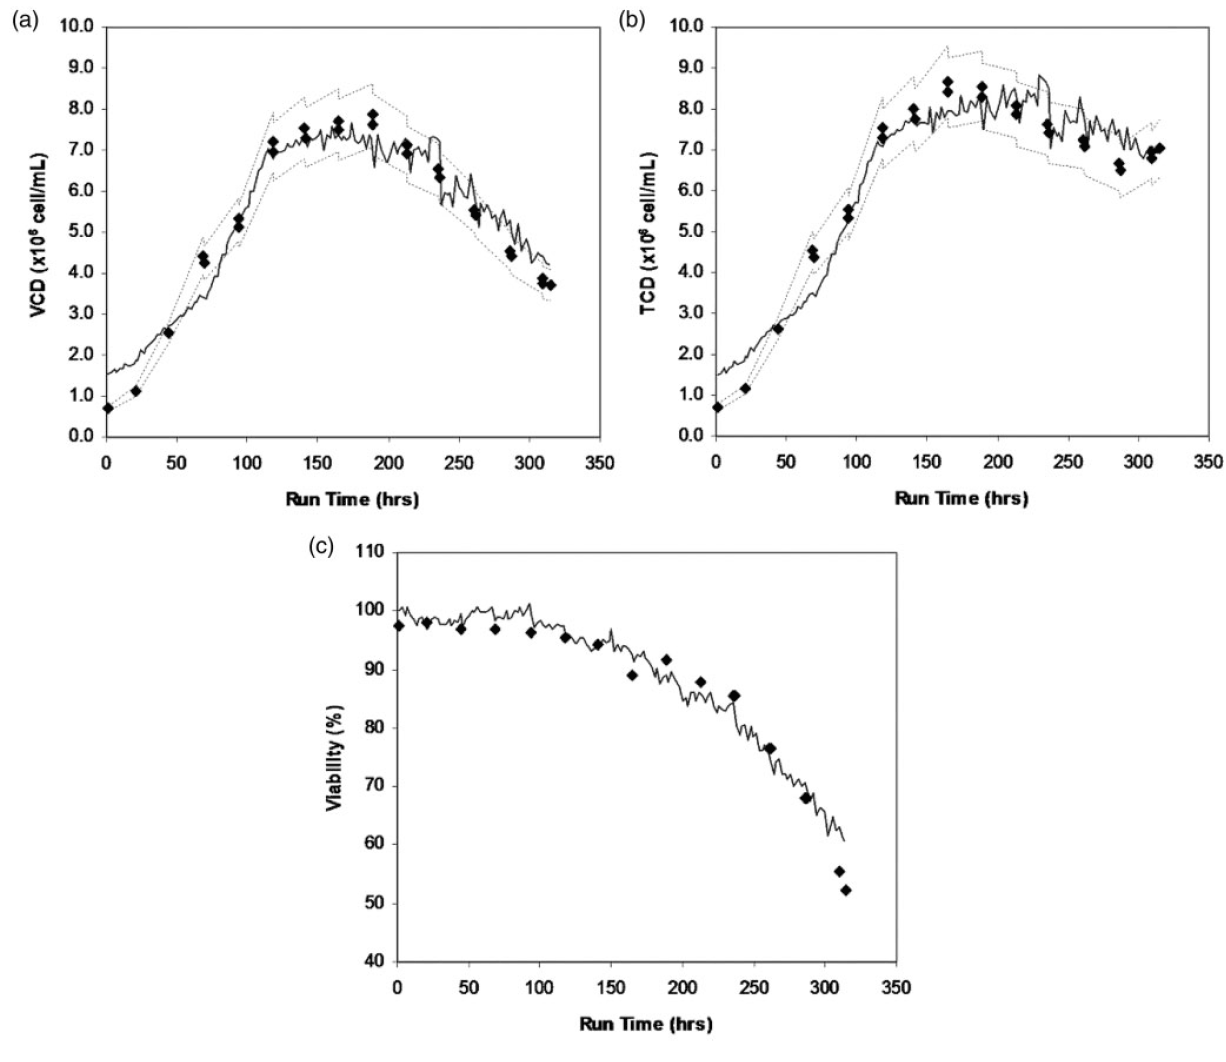 Figure 6: Comparison of (a) viable cell counts, (b) total cell counts, and (c) viabilities using a Cedex cell counter and predictions from Raman spectra for cell counts